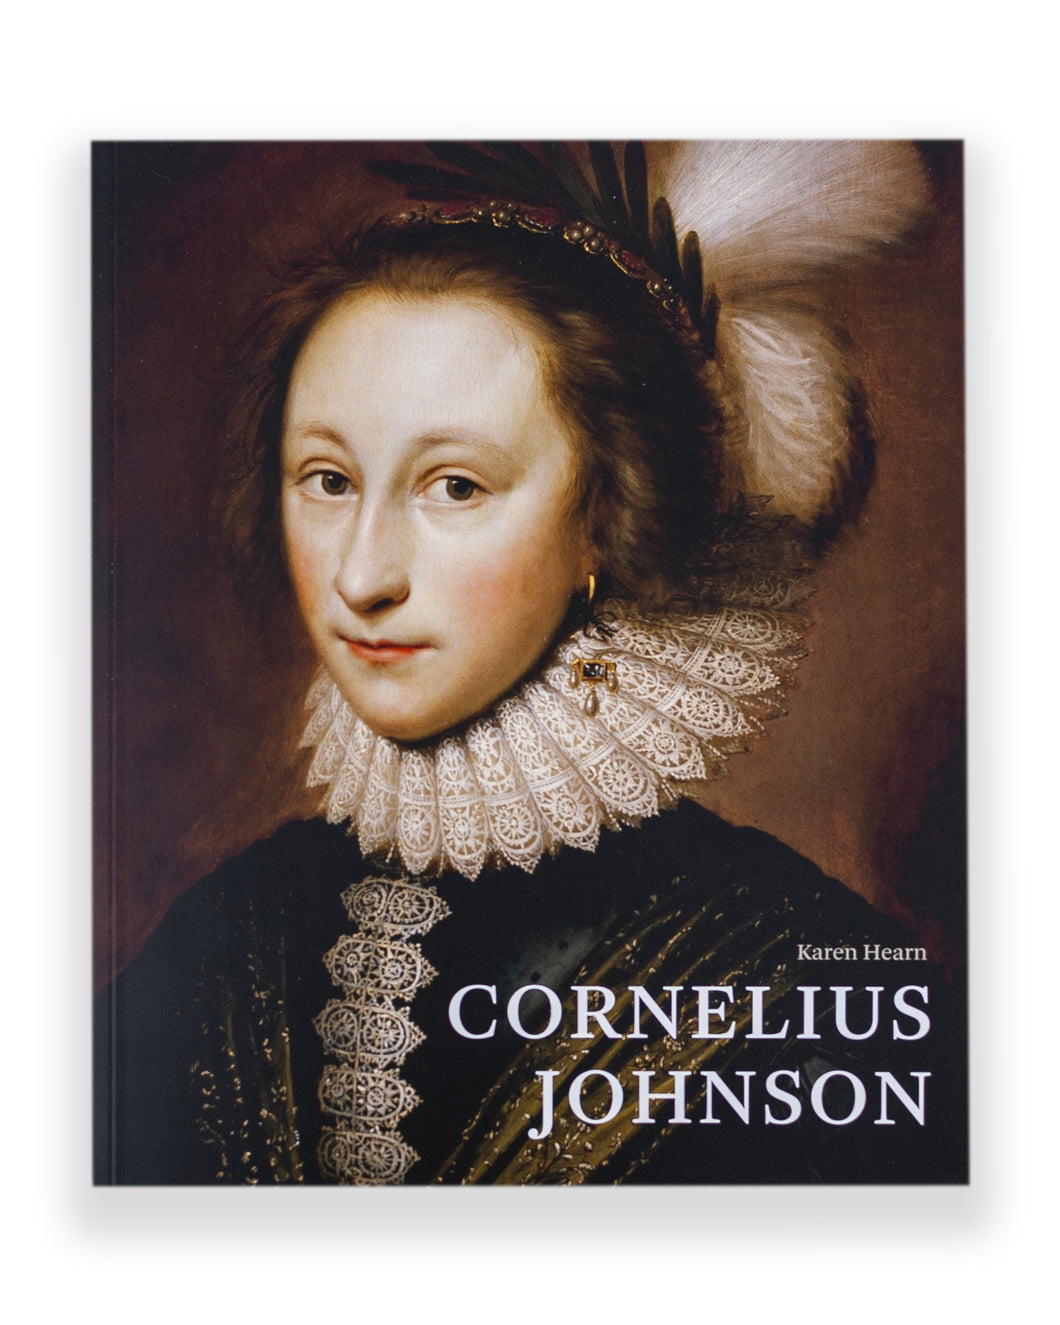 The front cover of the book Cornelius Johnson by Karen Hearn